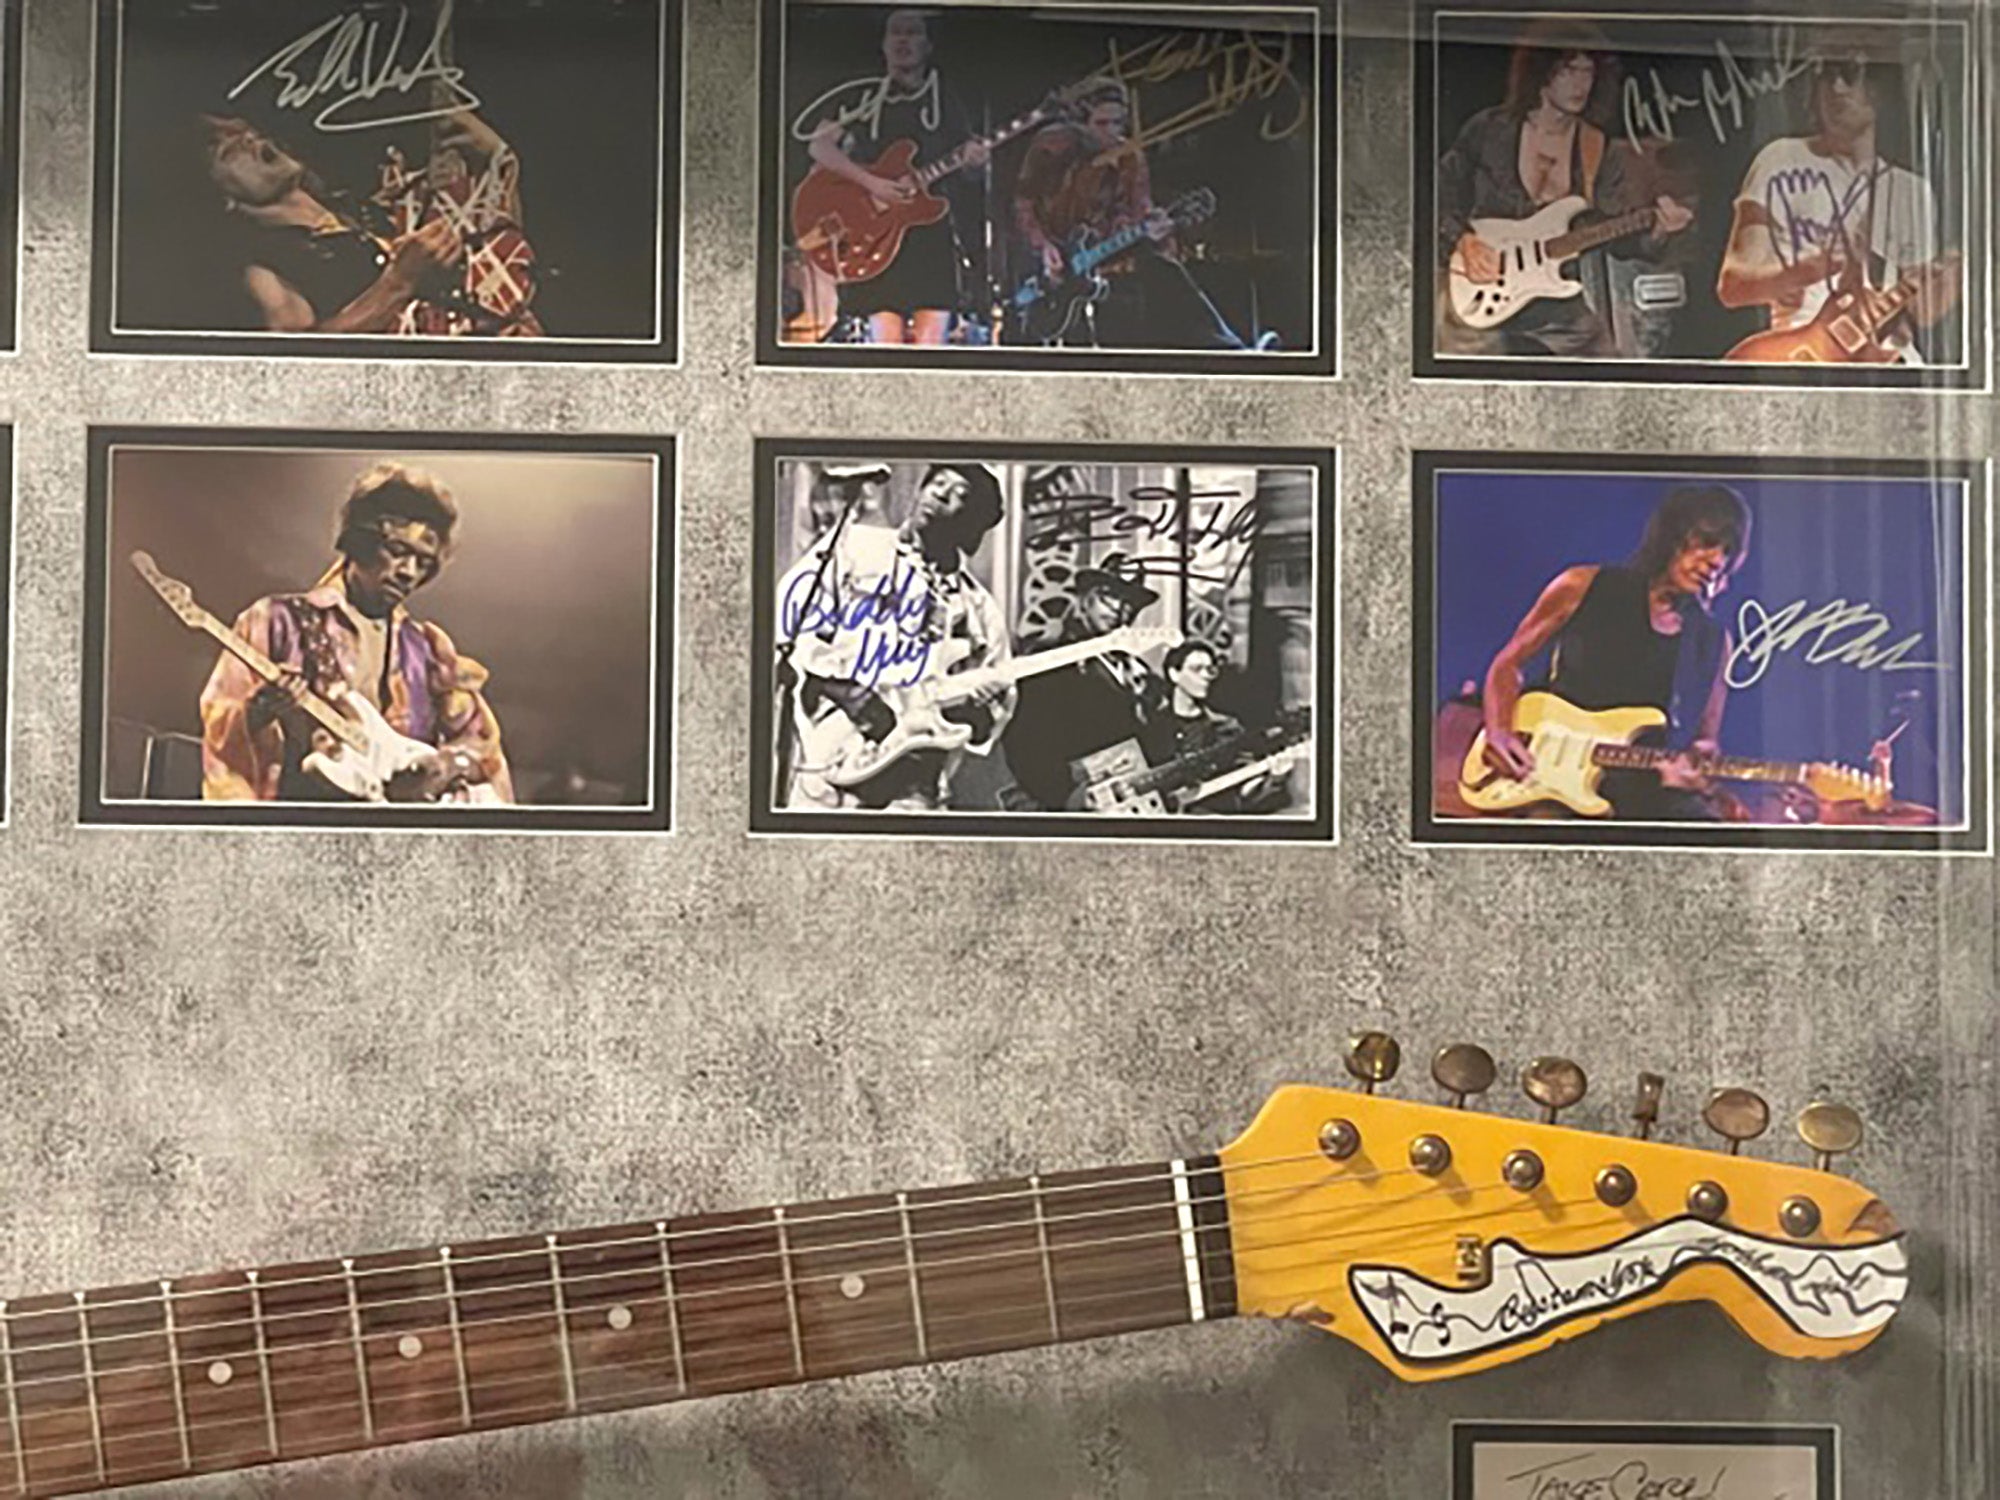 Guitarist Legends Stevie Ray Vaughan, Jimi Hendrix, Chuck Berry, Jimmy Page, Eric Clapton 48x42 inches framed guitar signed with proof